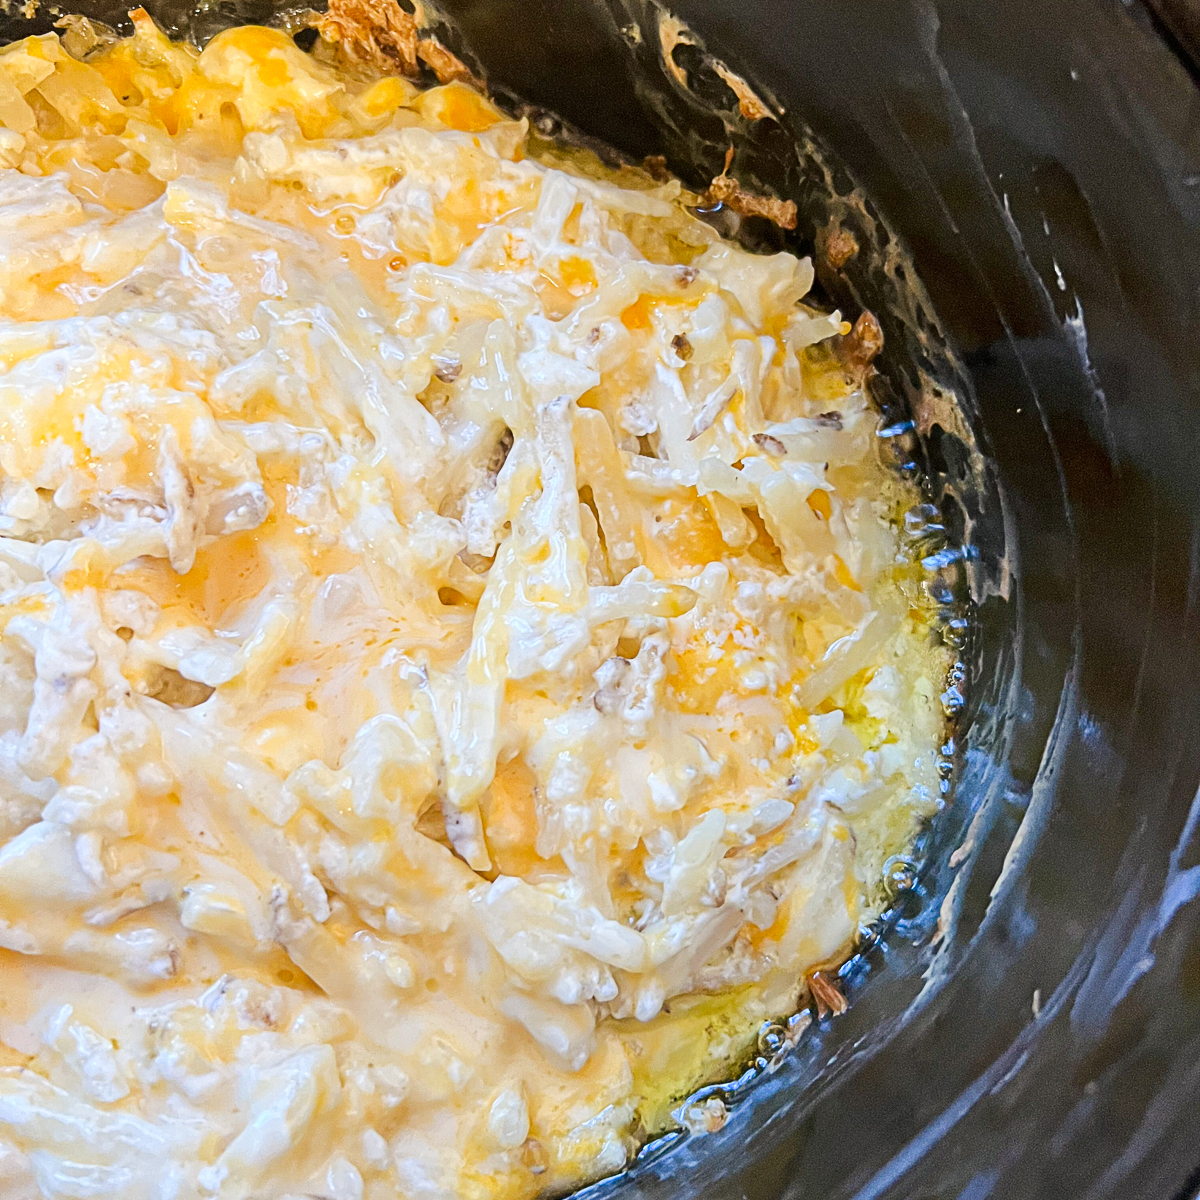 Cracker Barrel Cheesy potatoes recipe in crockpot after cooking